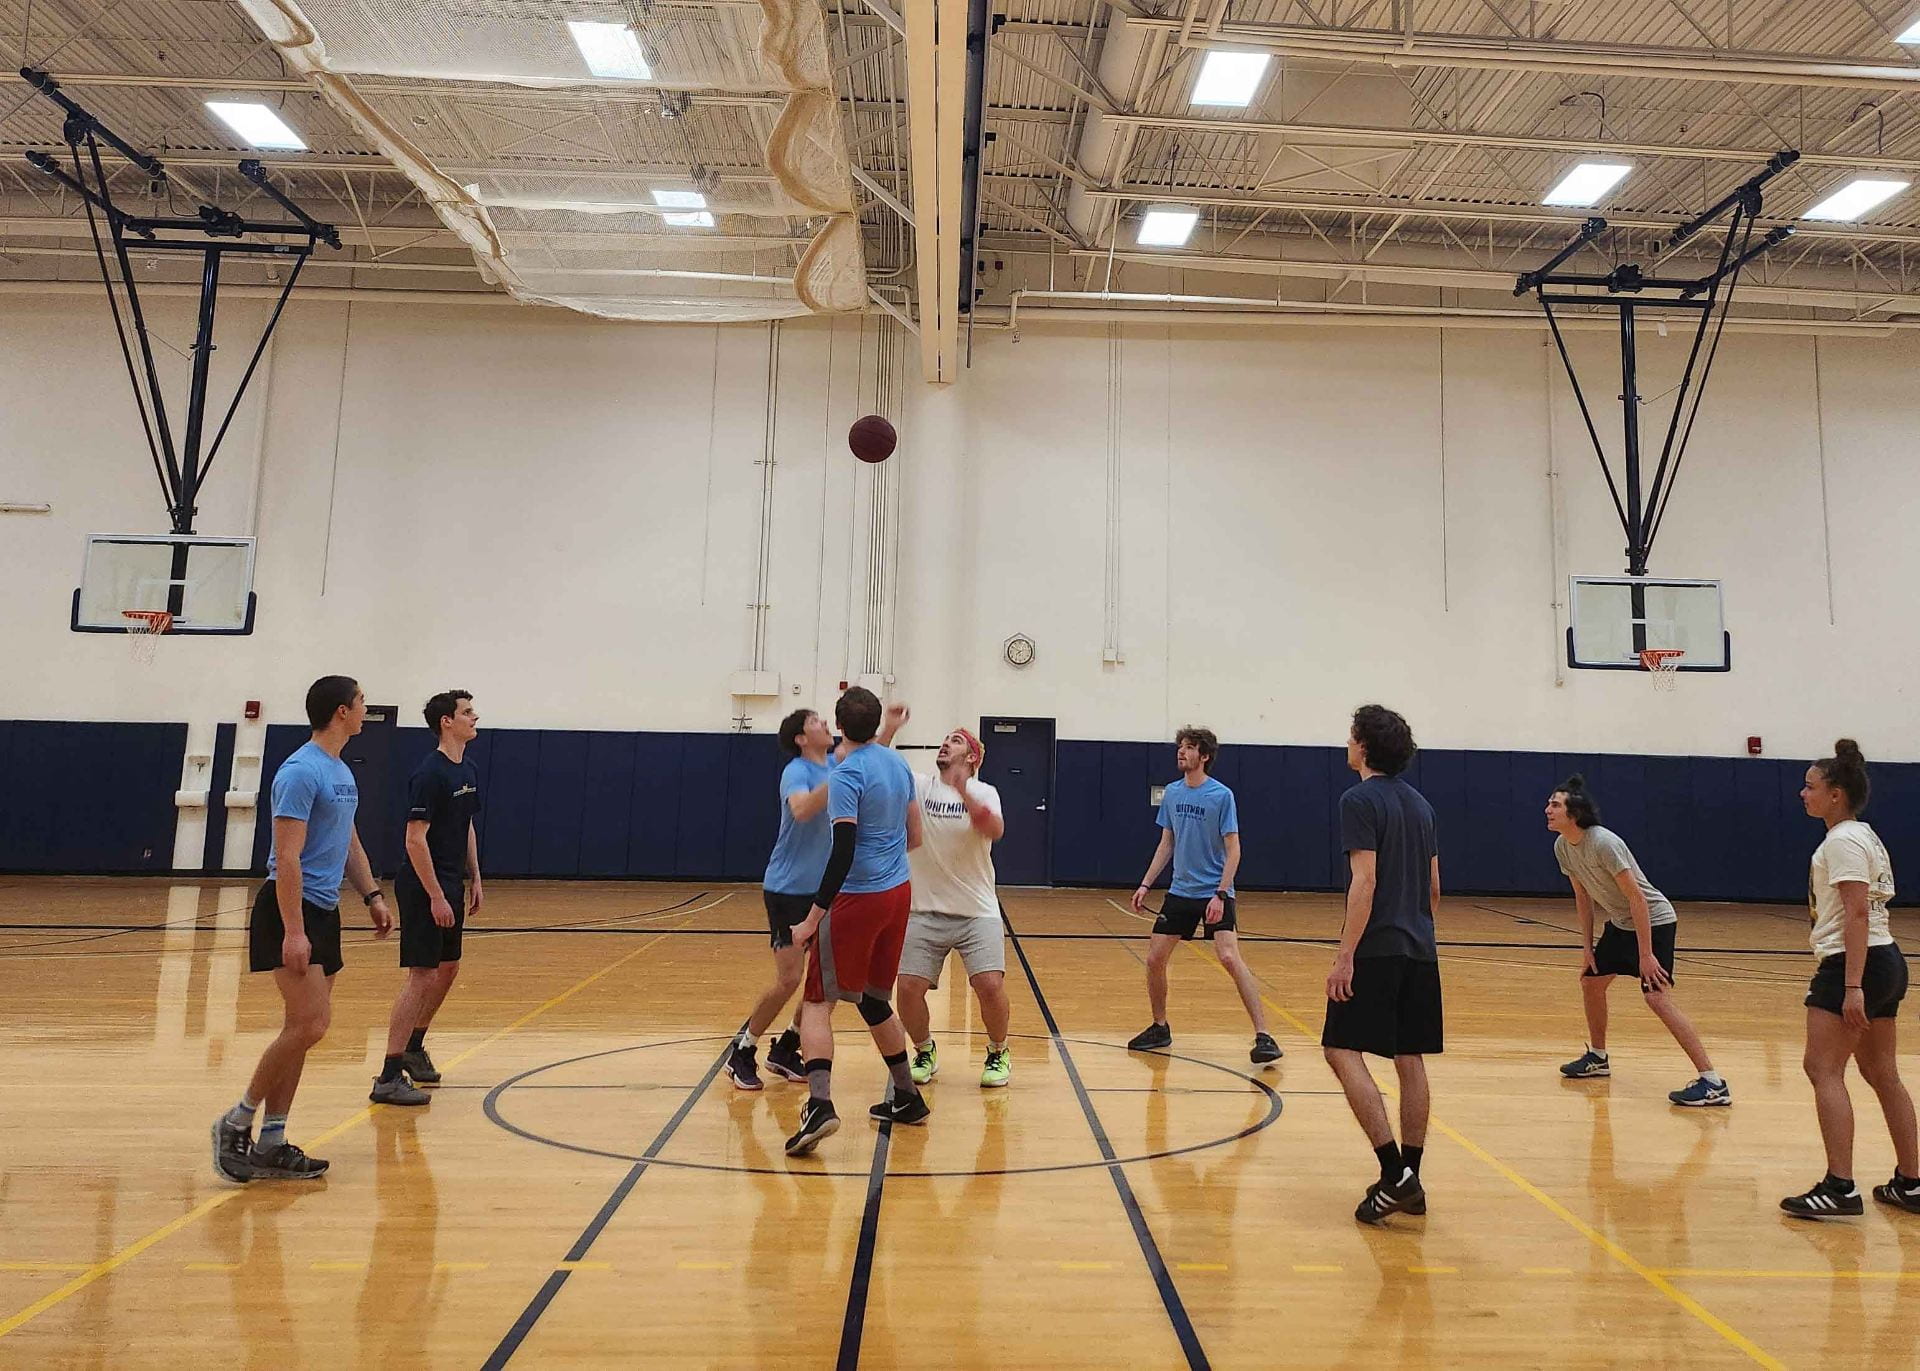 Intramural sports team playing basketball.